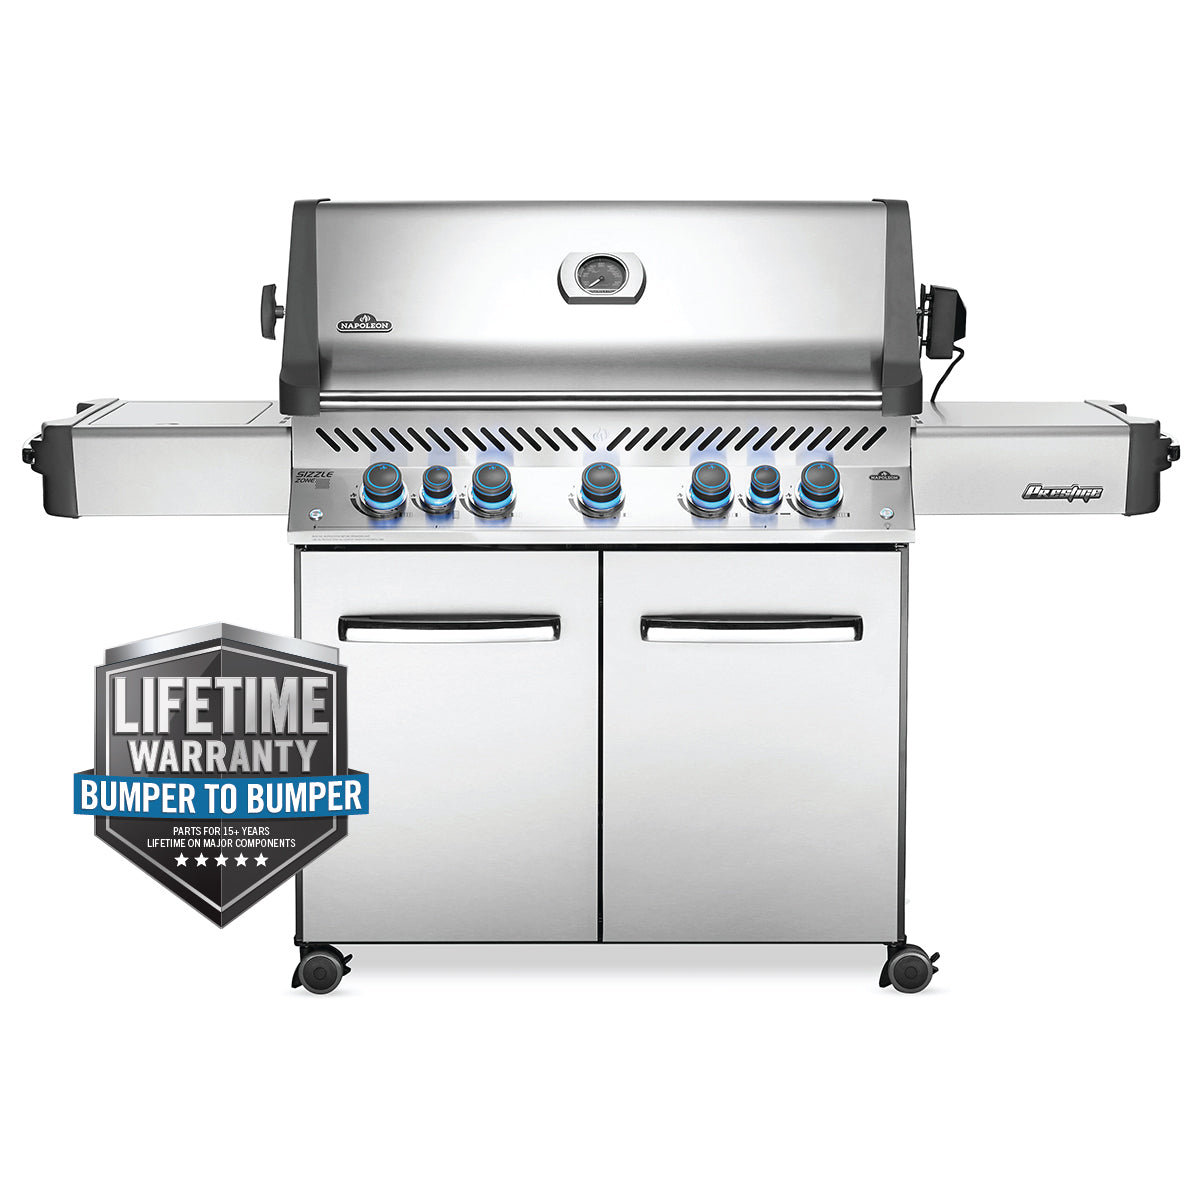 Napoleon Prestige 665 LP Gas Grill (Stainless Steel) P665RSIBPSS